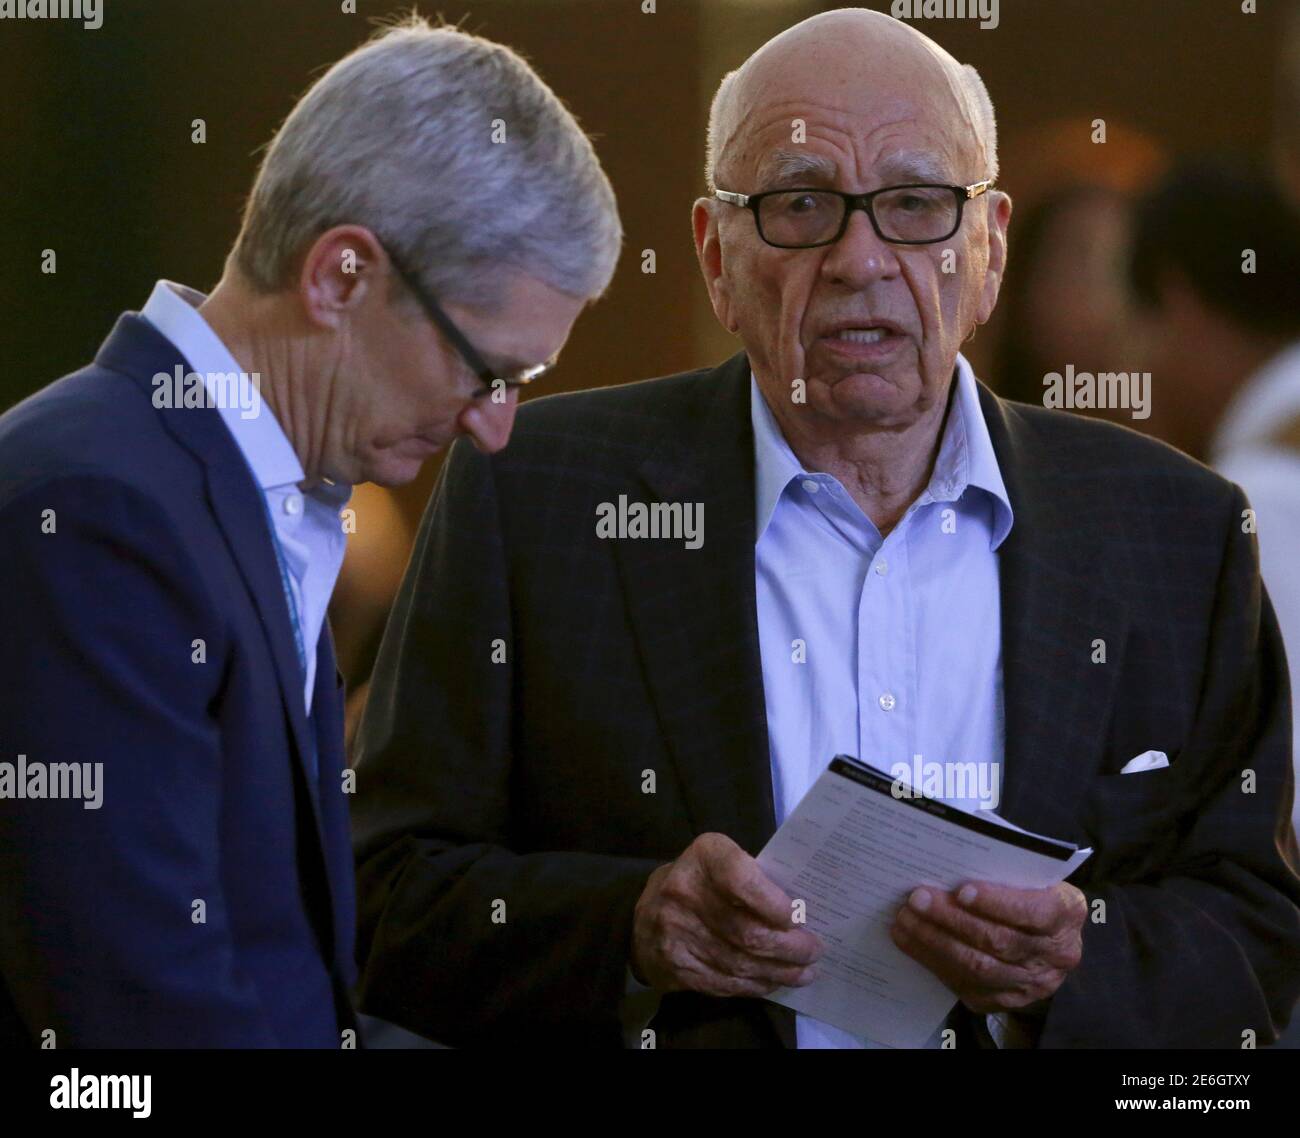 Apple CEO Tim Cook (L) talks with News Corp Executive Chairman Rupert Murdoch before sitting down to dinner at the  Wall Street Journal Digital Live ( WSJDLive ) conference at the Montage hotline Laguna Beach, California   October 19, 2015.      REUTERS/Mike Blake Stock Photo